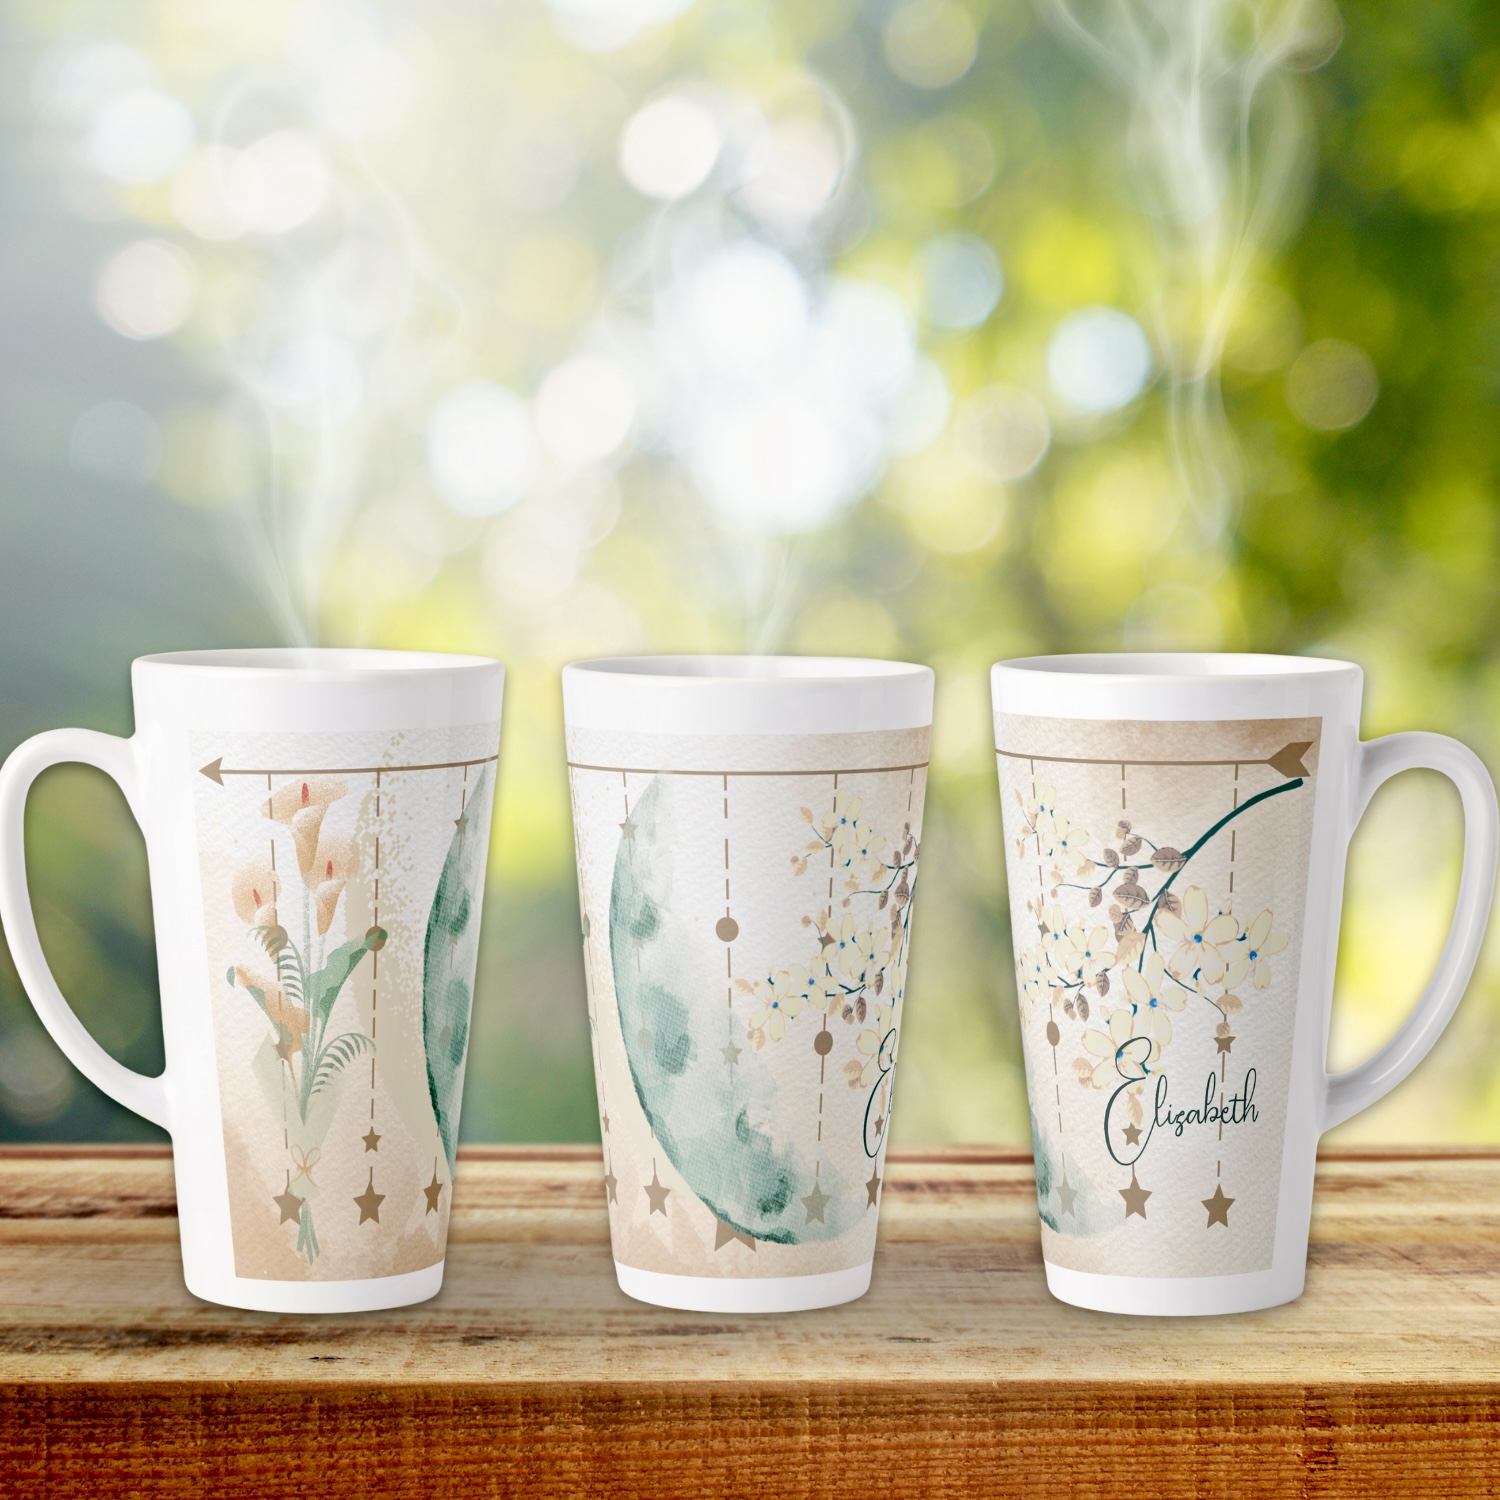 Earthy Decorative Flower Latte Mug featuring three captivating sides adorned with delicate floral patterns.